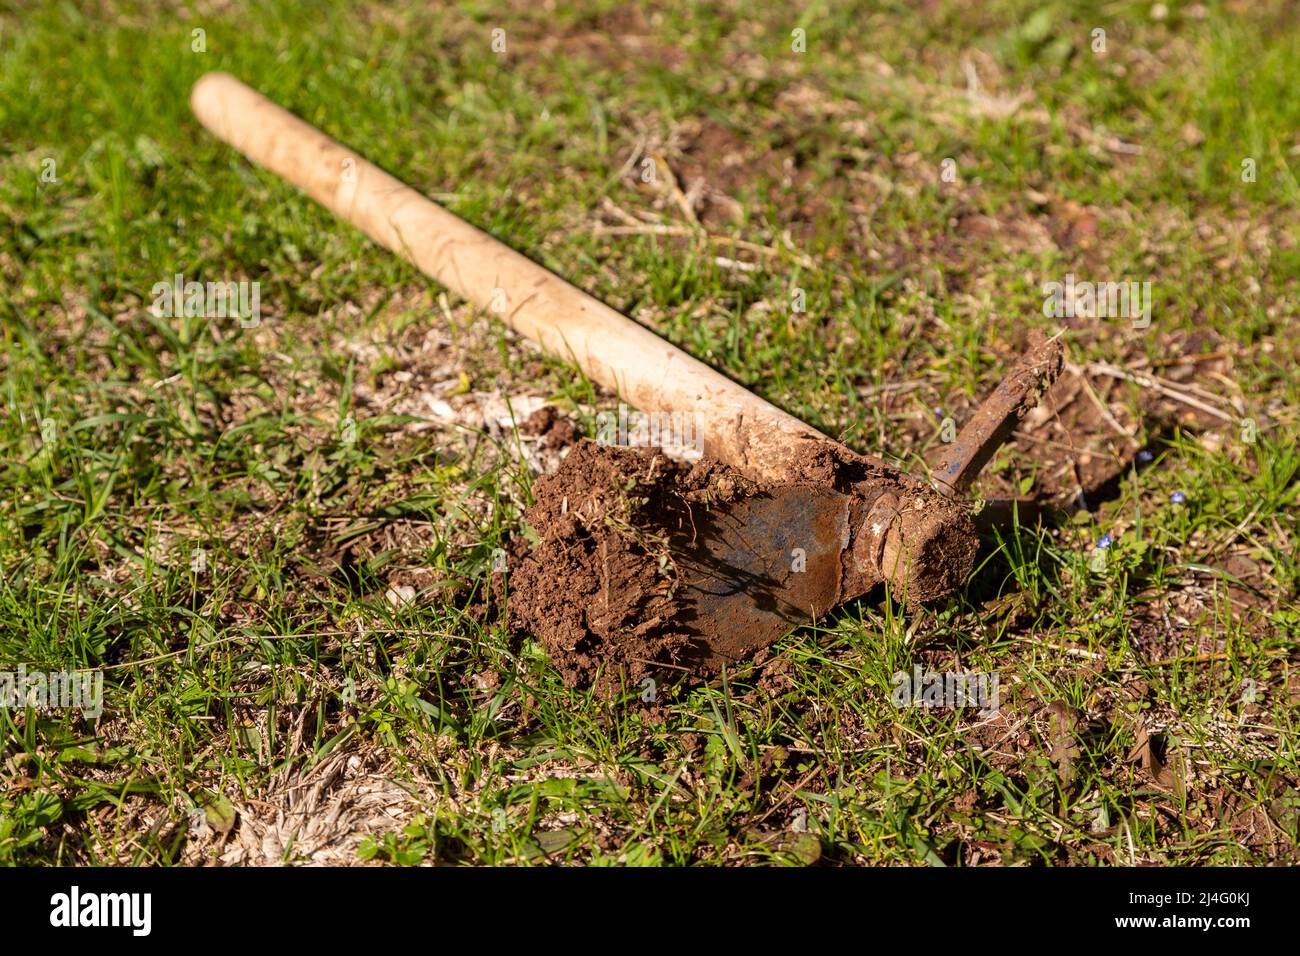 Farming hoe on grass with soil on it. Metal part of farming hoe in selective focus. Spring, gardening, farming concept. Stock Photo